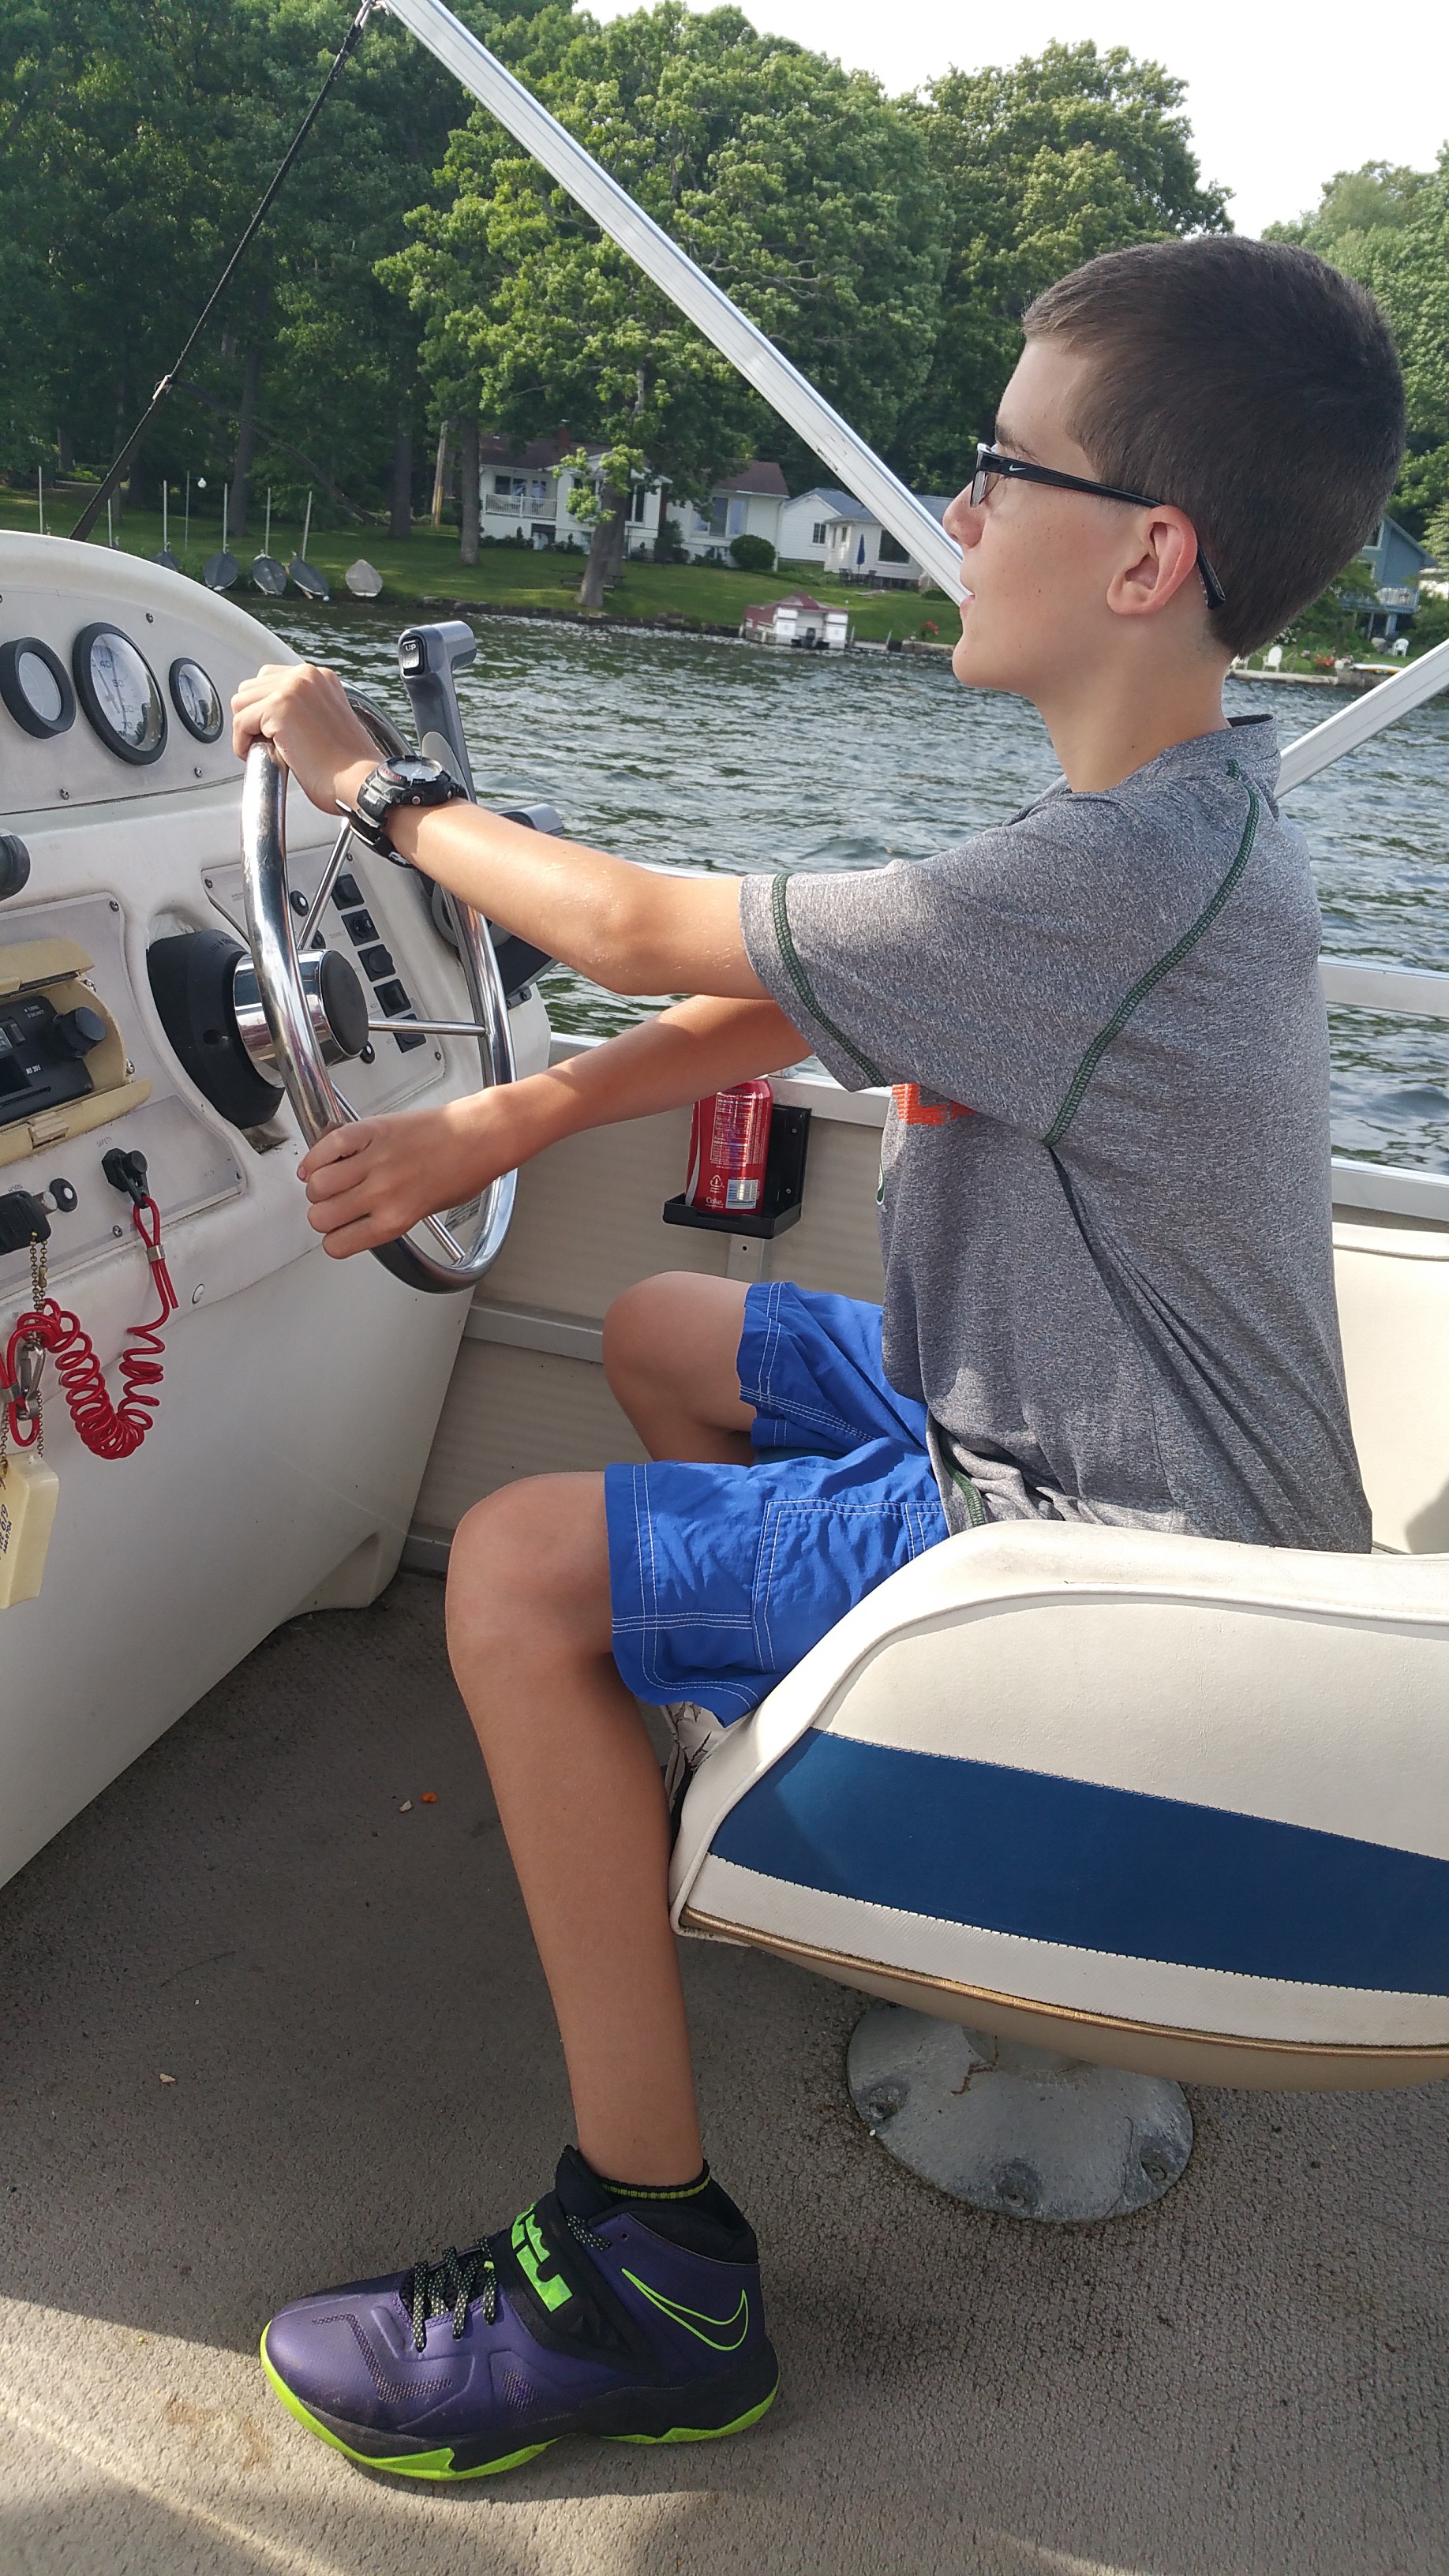 cousin Brian on a boat!